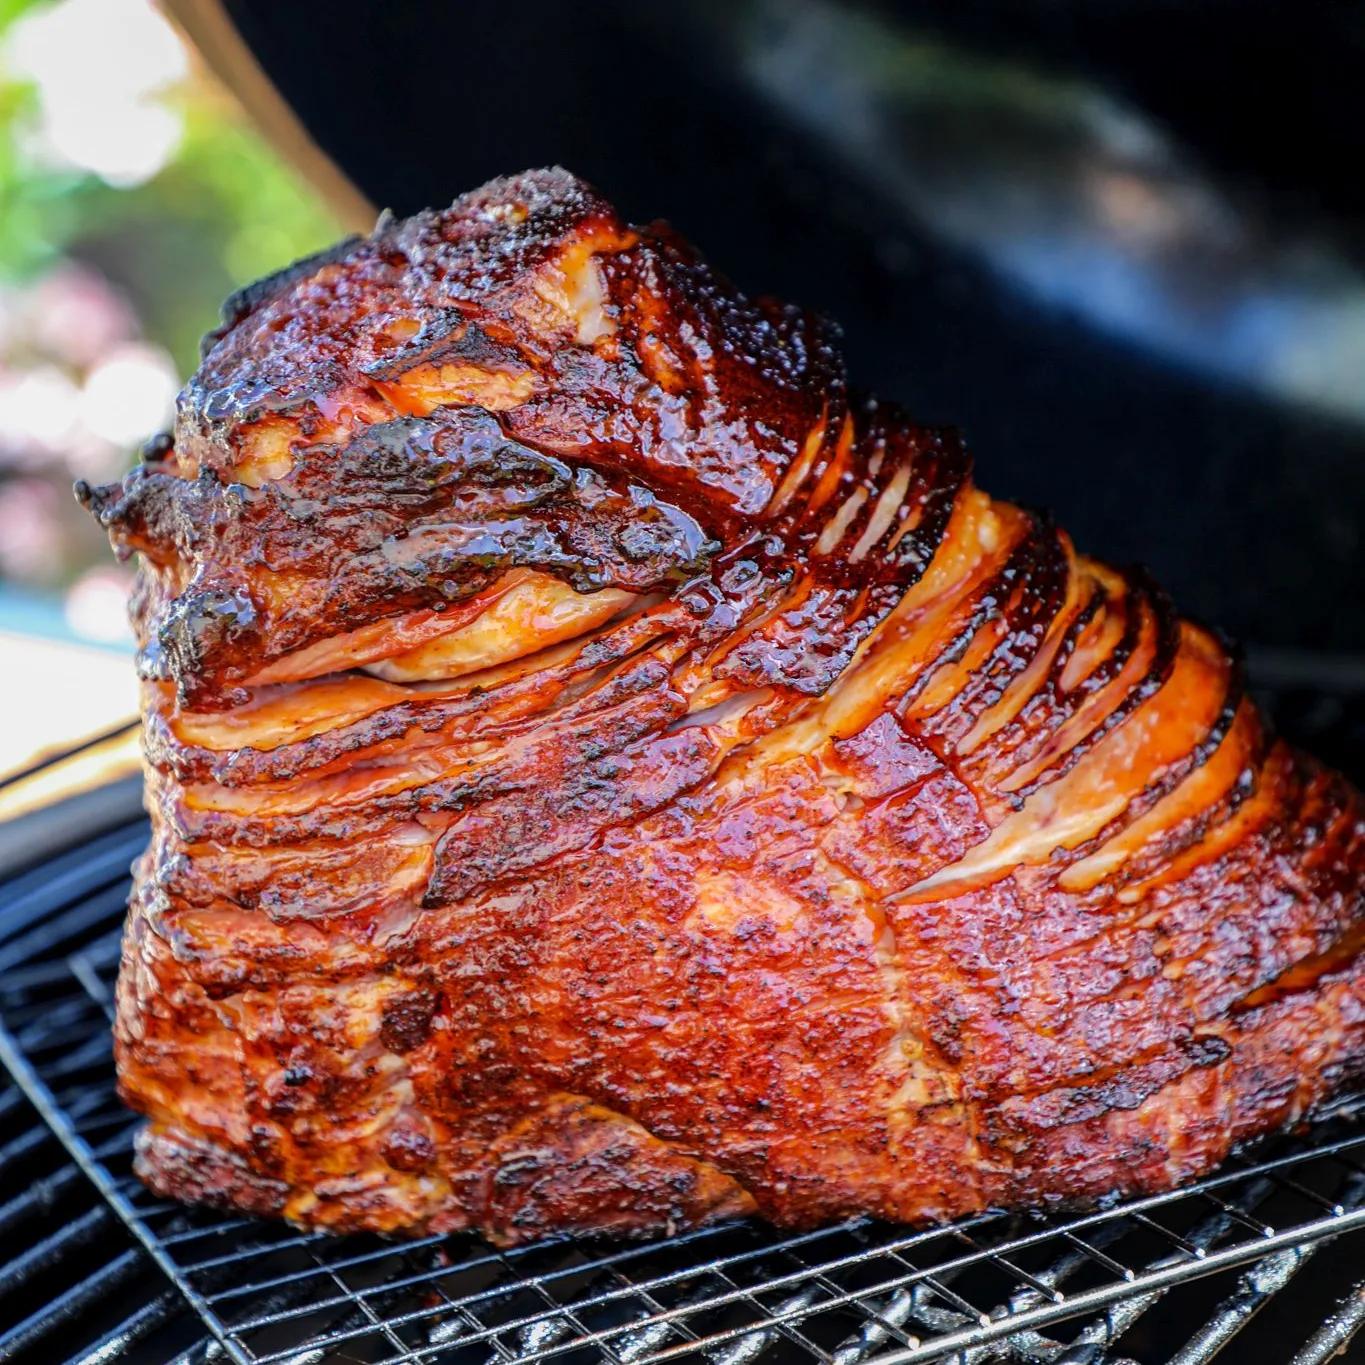 double smoked ham big green egg - What is the difference between smoked and double smoked ham